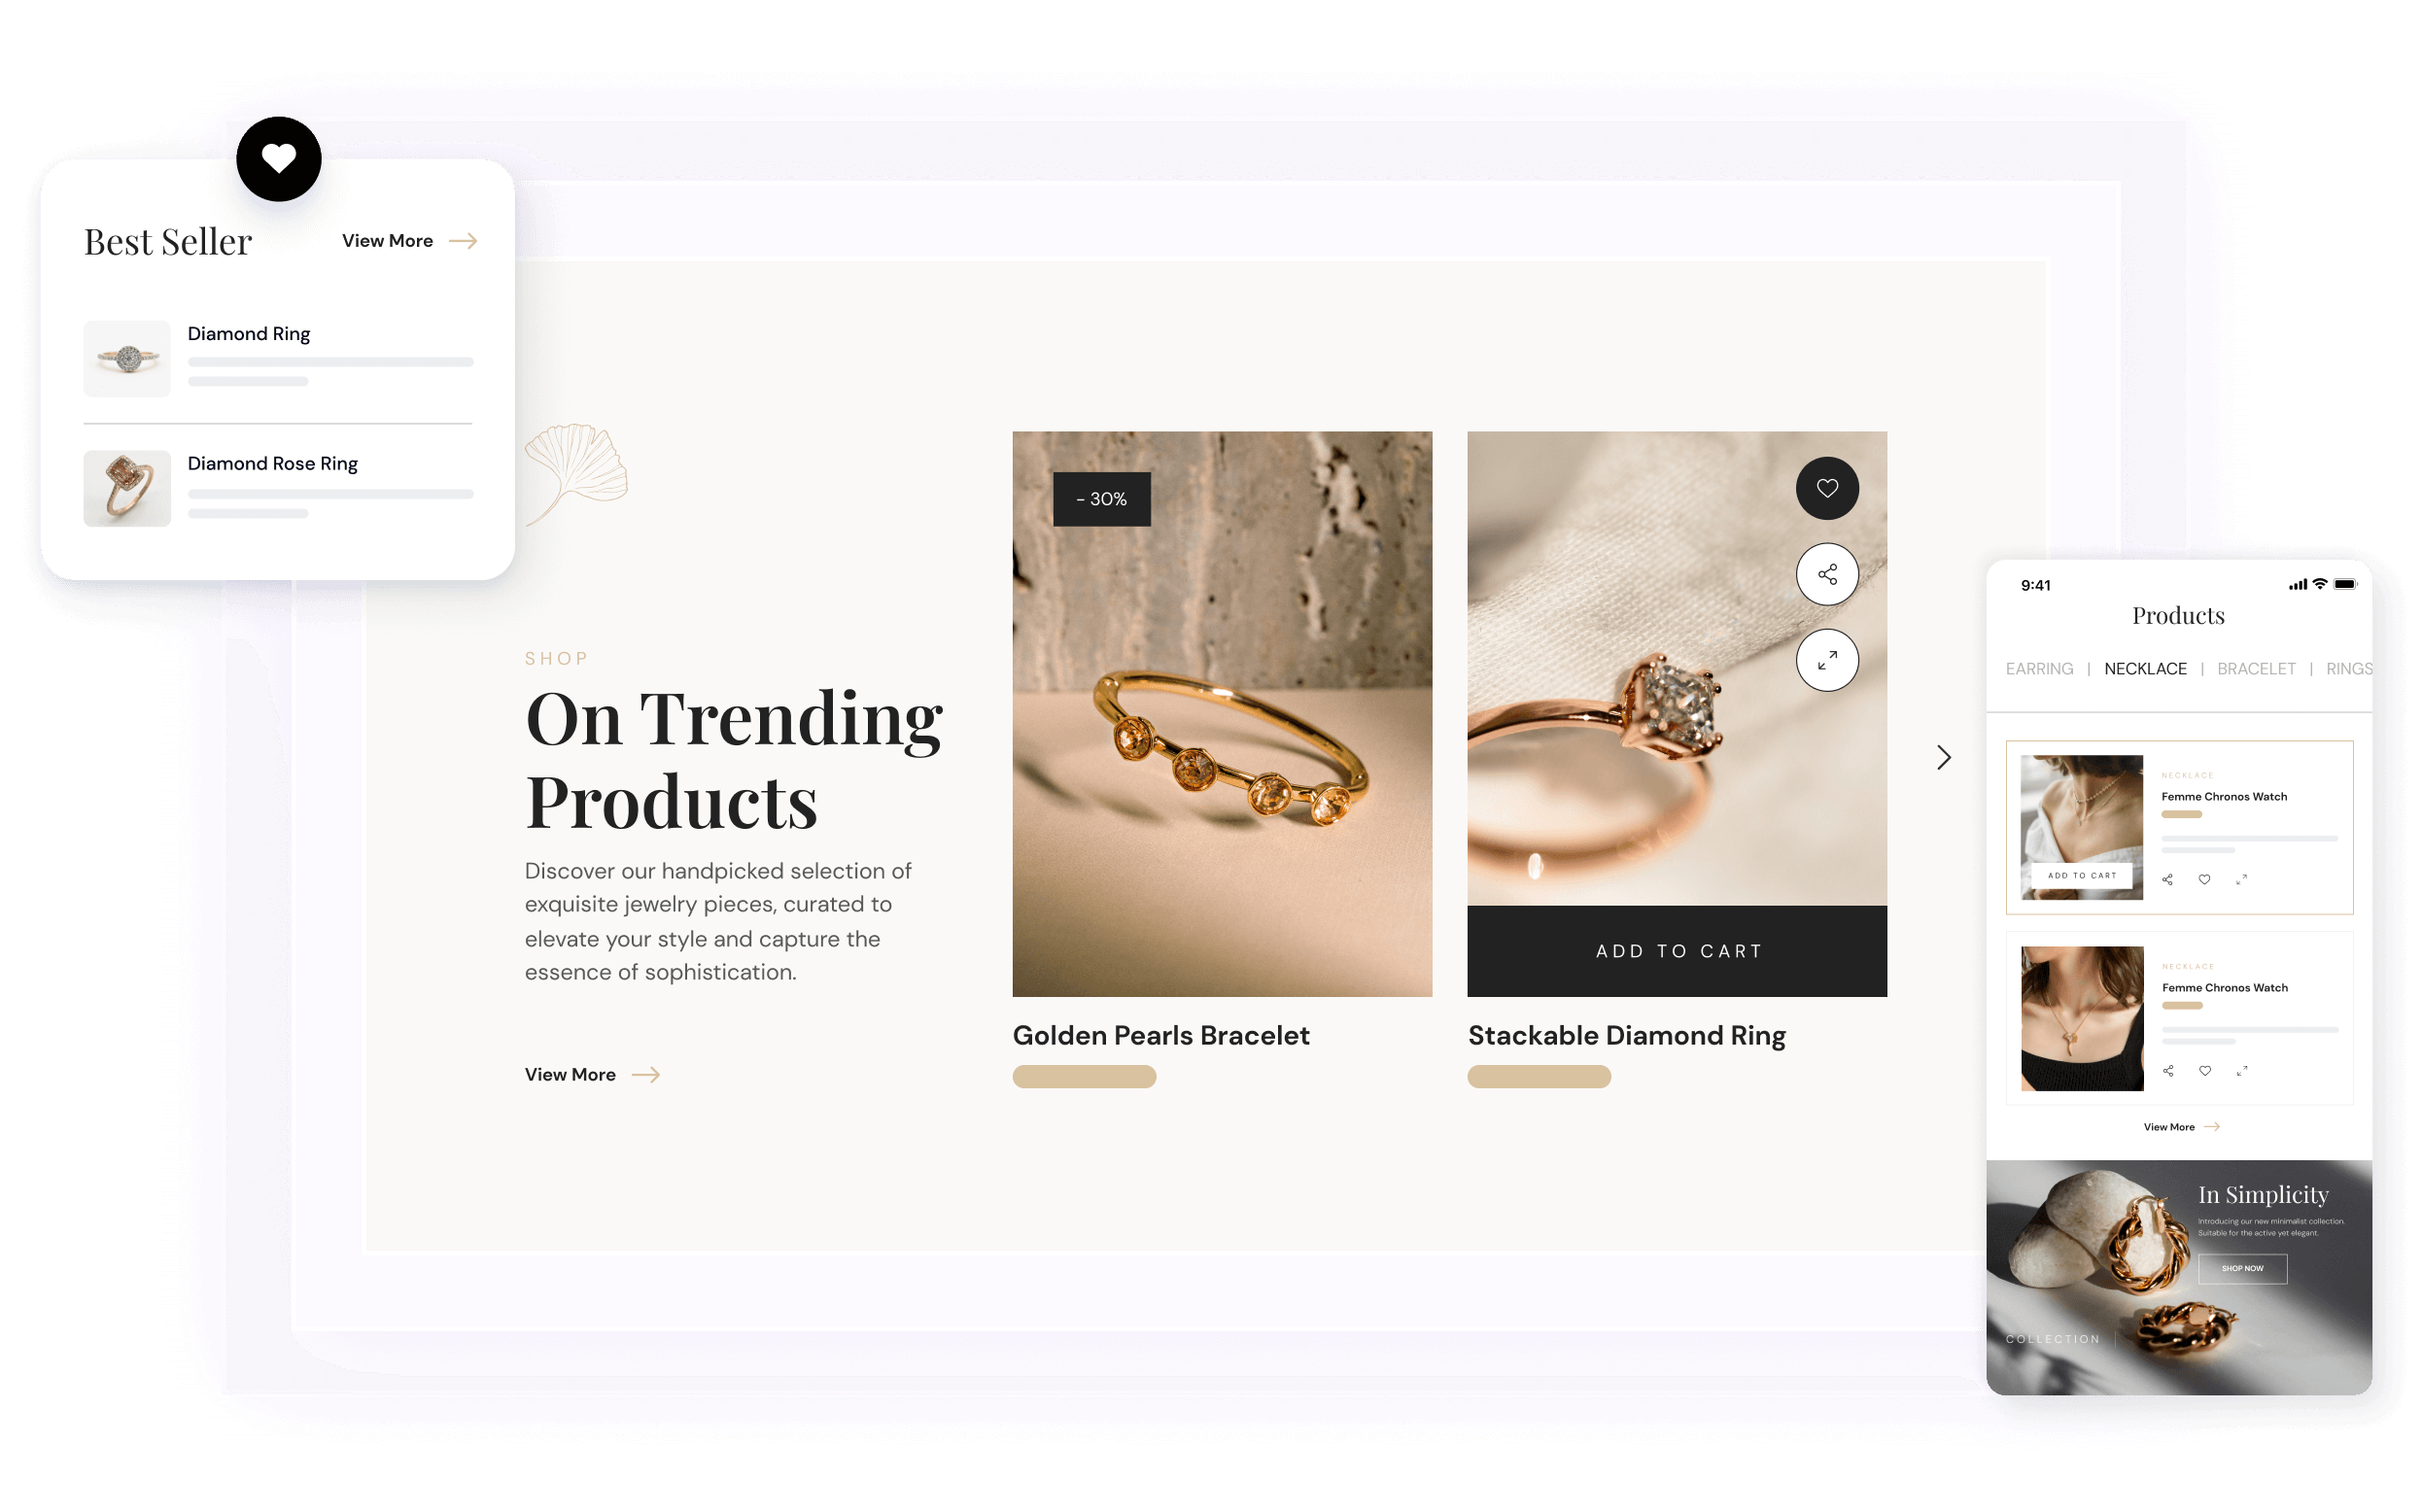 A sleek and modern online jewellery store webpage displays trending products like a golden pearls bracelet and a stackable diamond ring, creating an appealing shopping experience for potential customers.